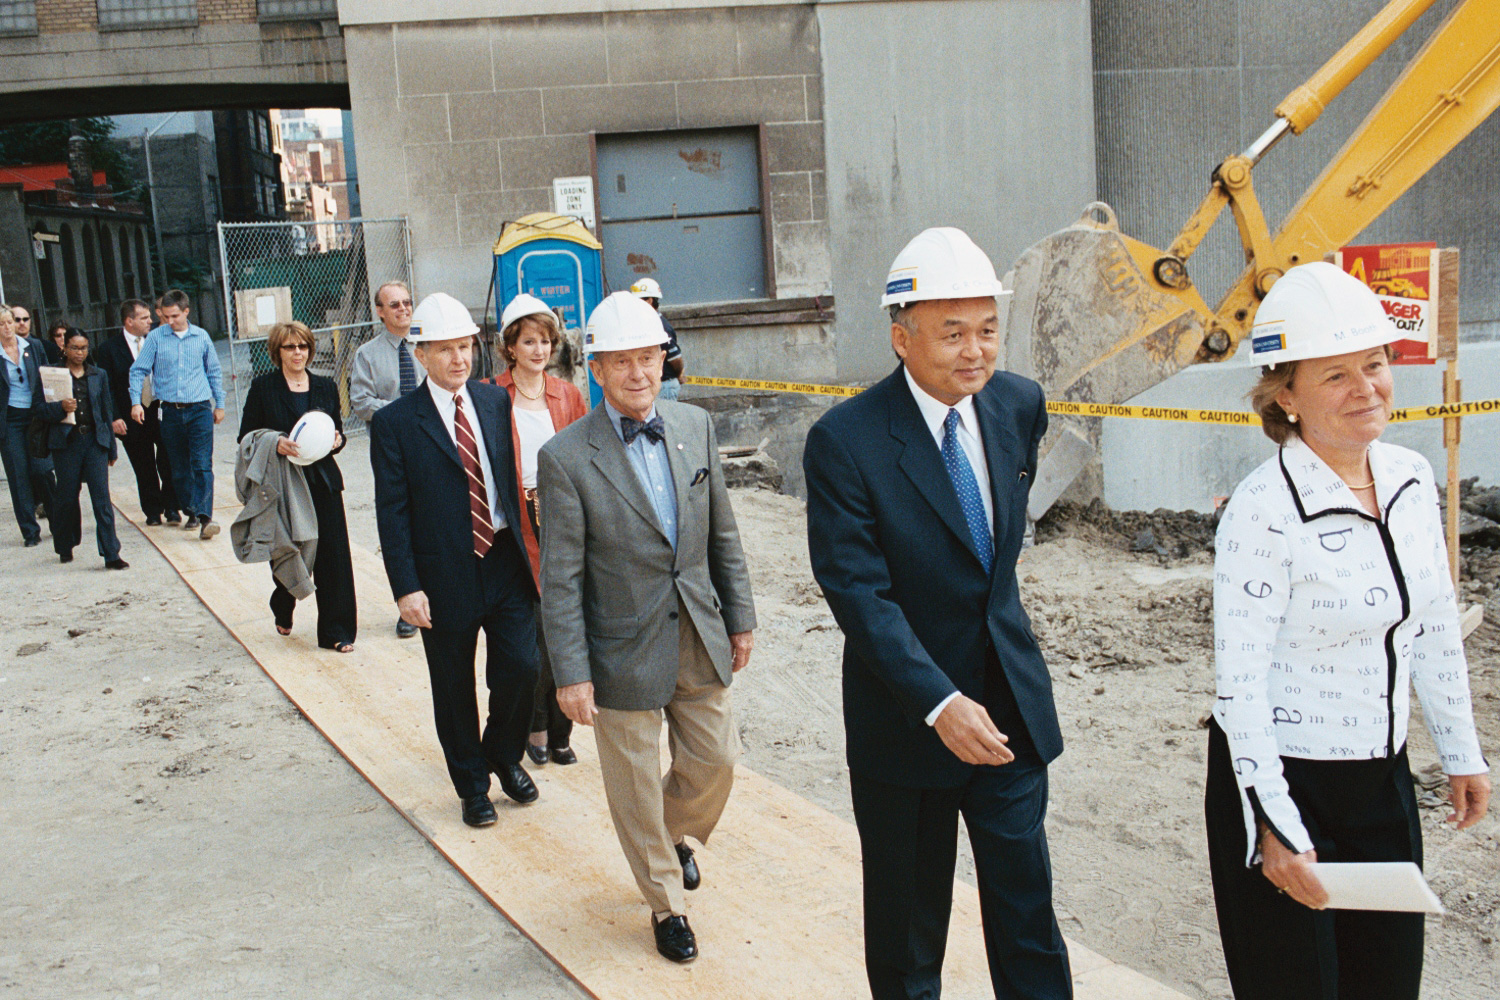 University administrators, including G. Raymond Chang, wearing hardhats walk single file to the Heaslip House building groundbreaking. A backhoe operates in the background.